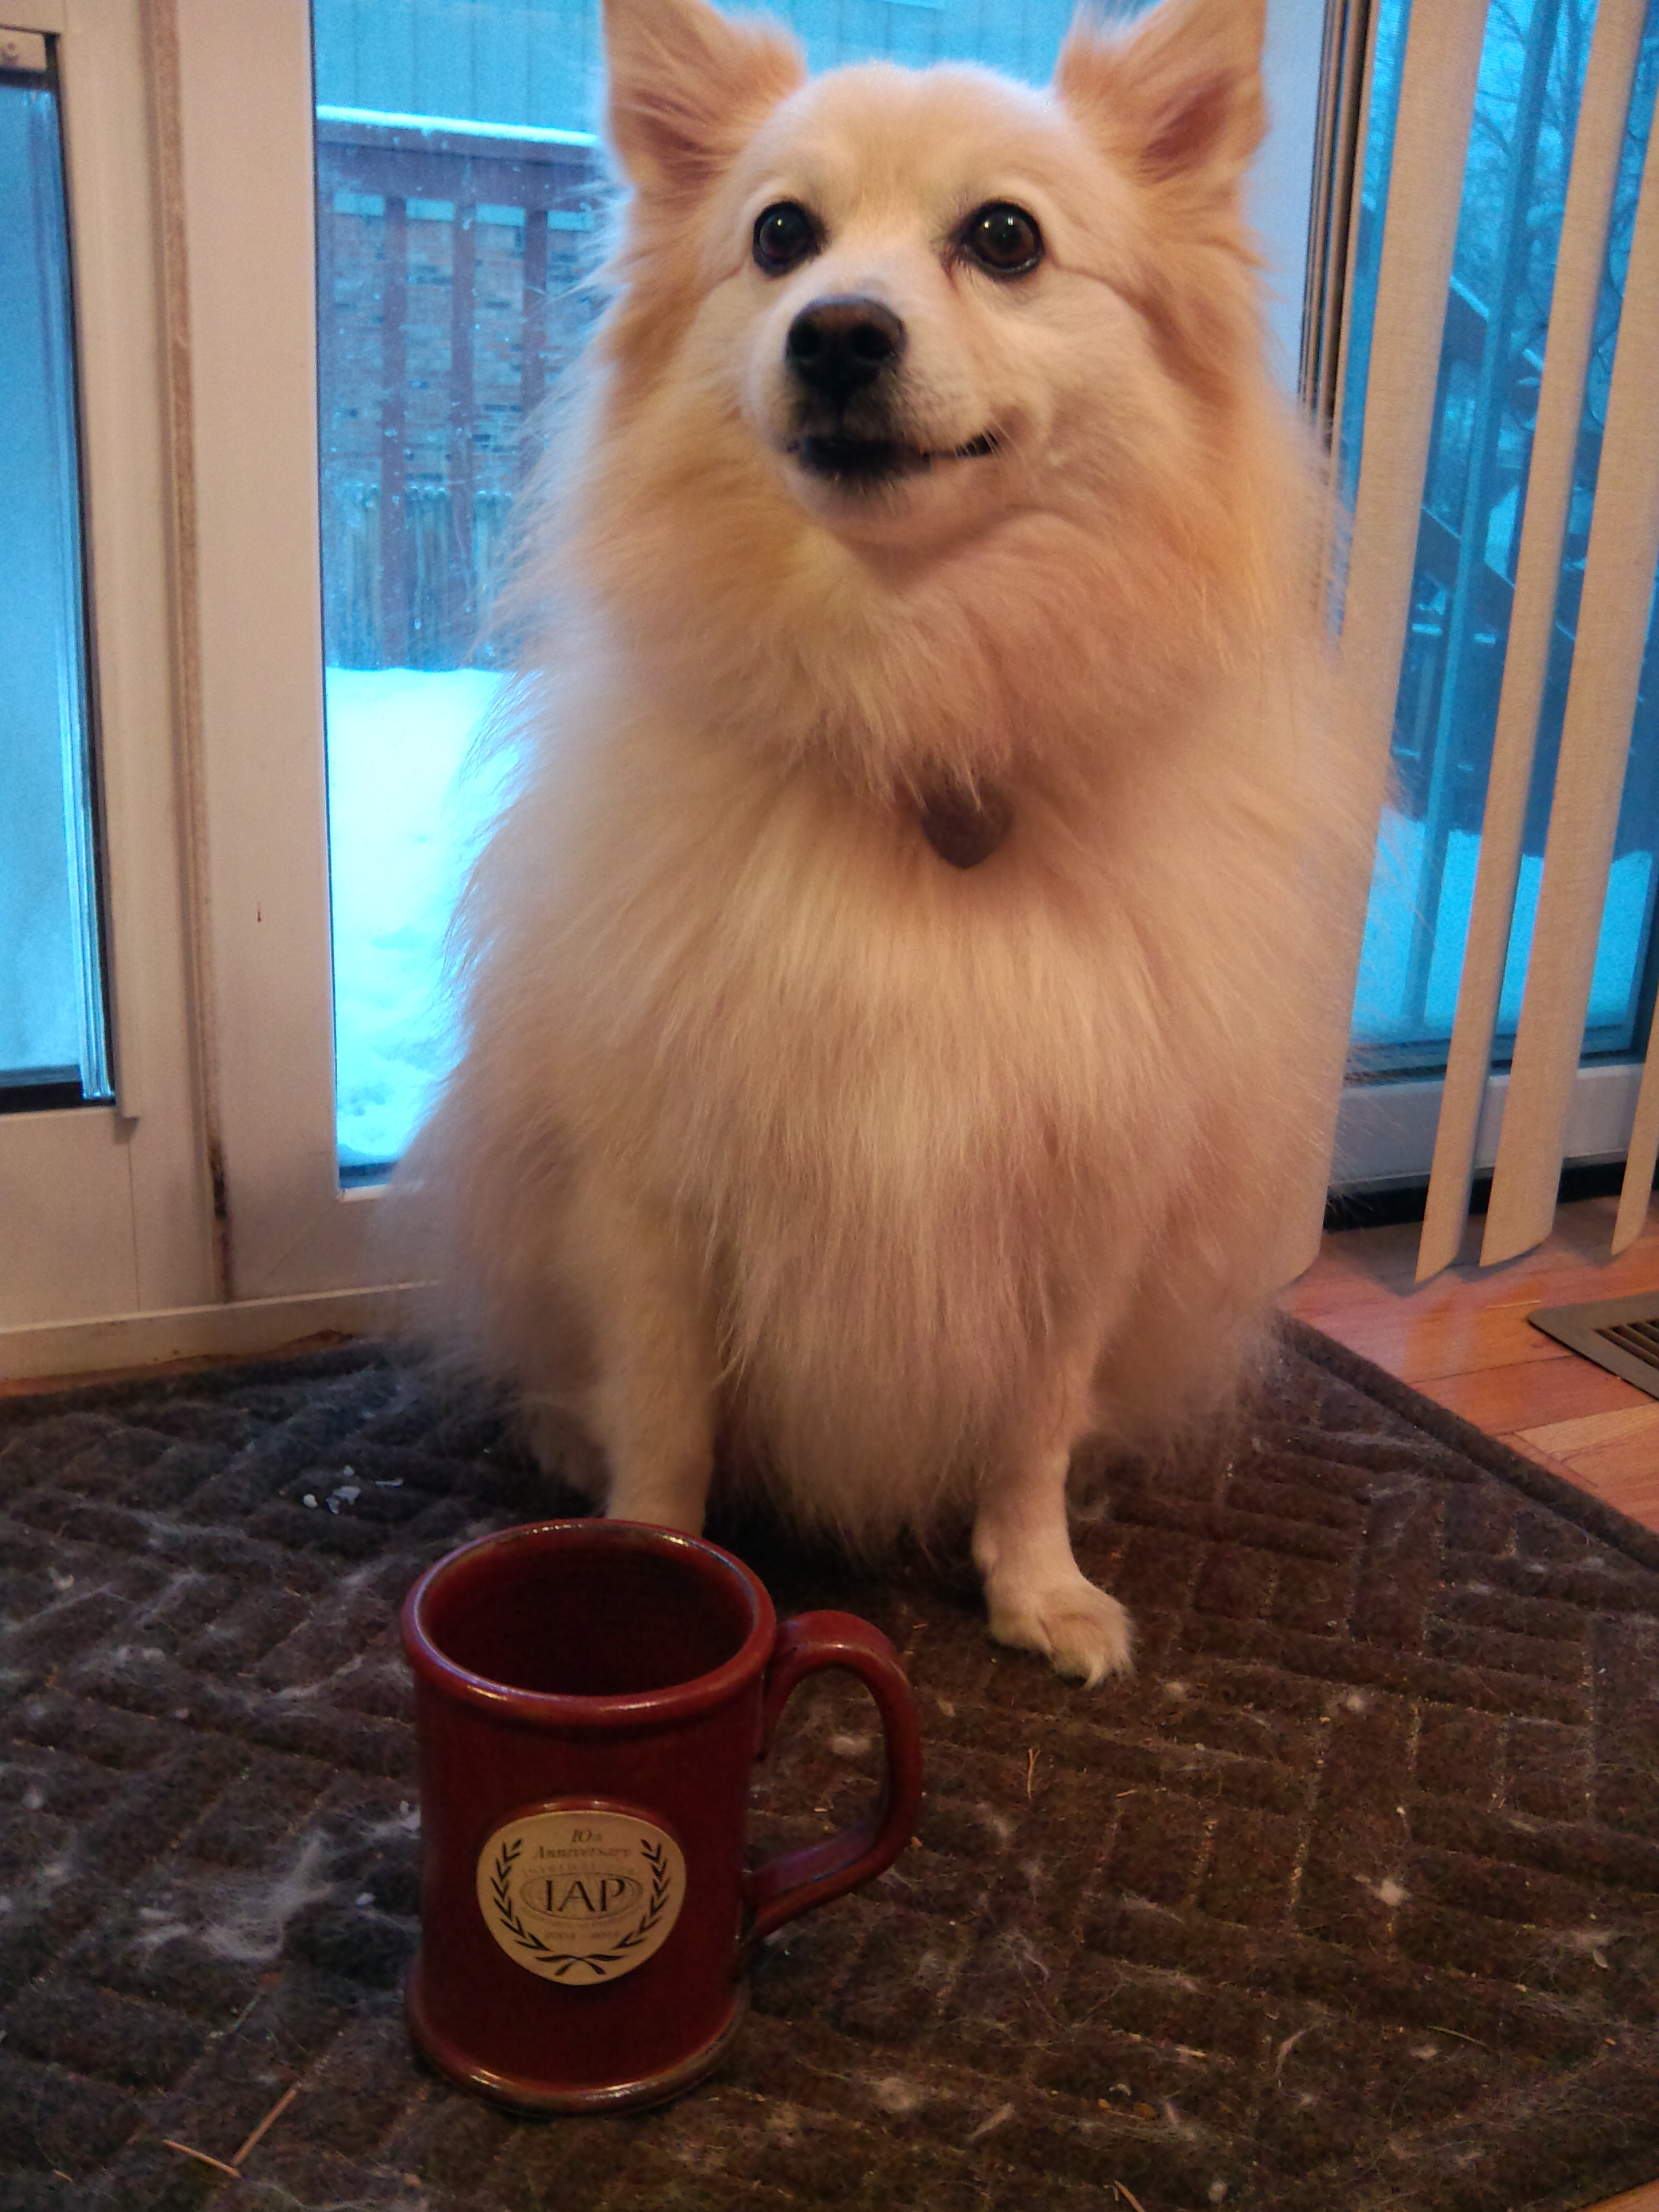 Puppy watching out for the MUG